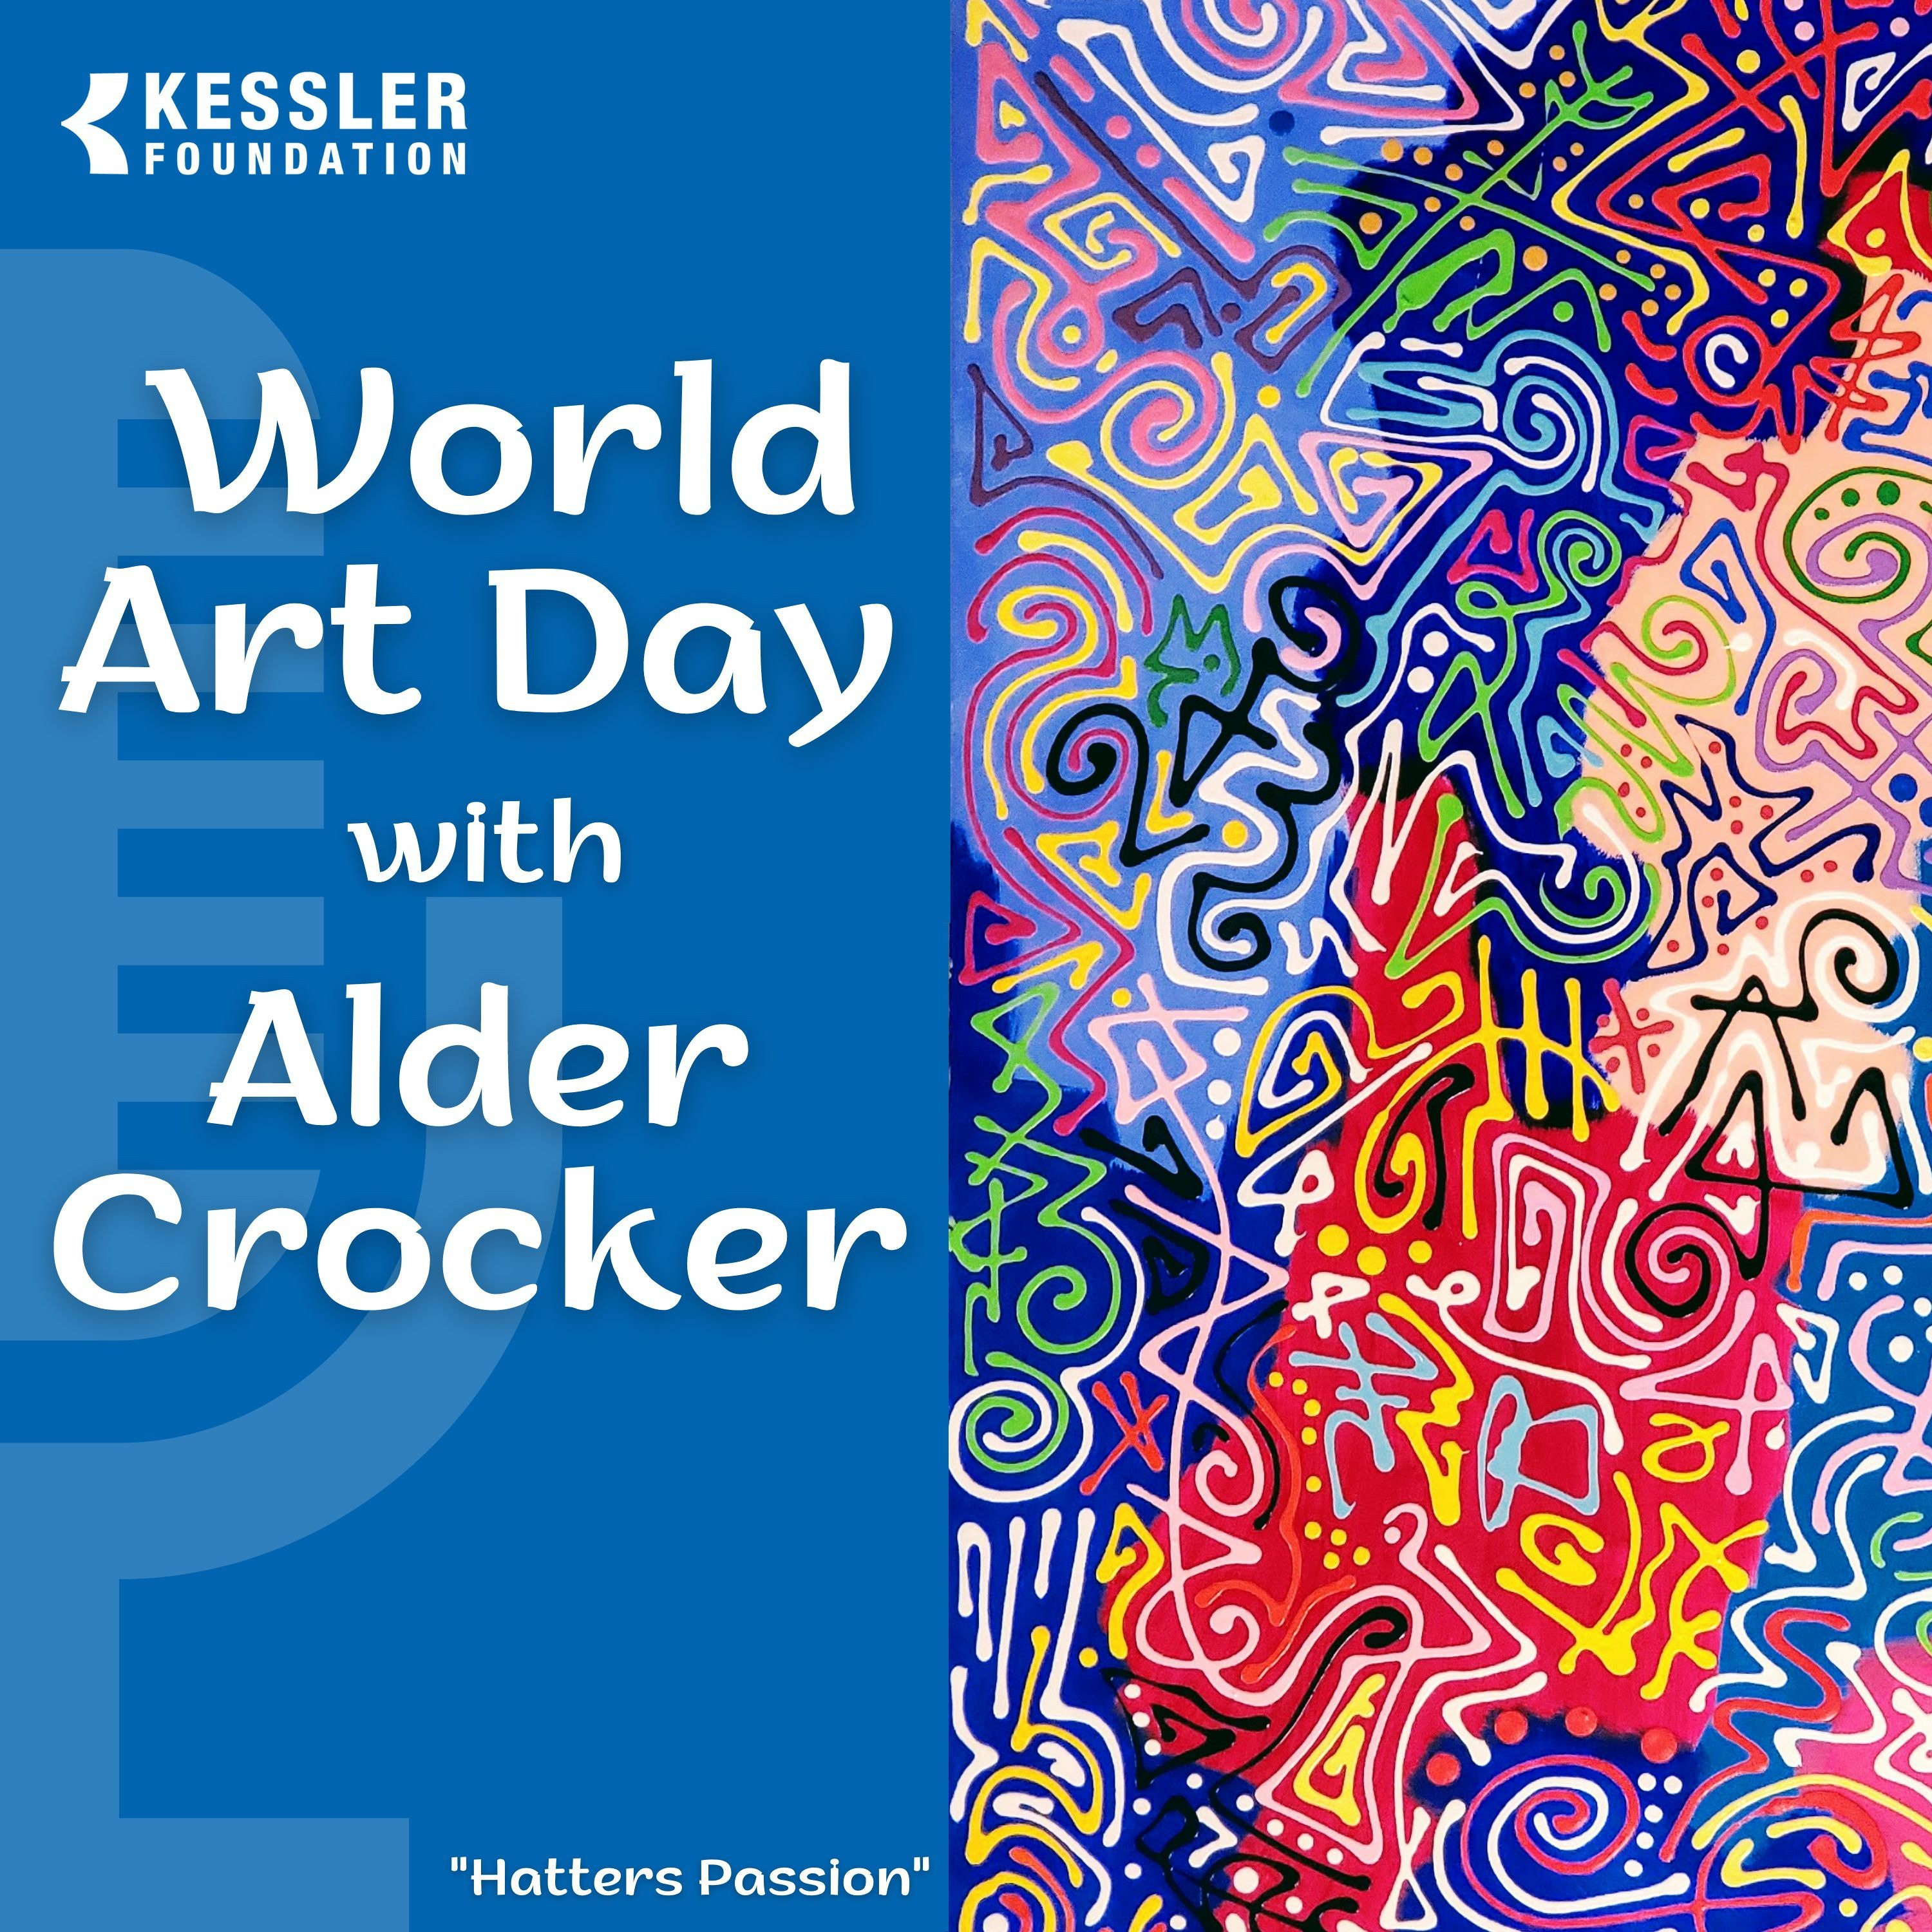 Alder Crocker: Becoming a Professional Artist After Traumatic Brain and Spinal Cord Injury